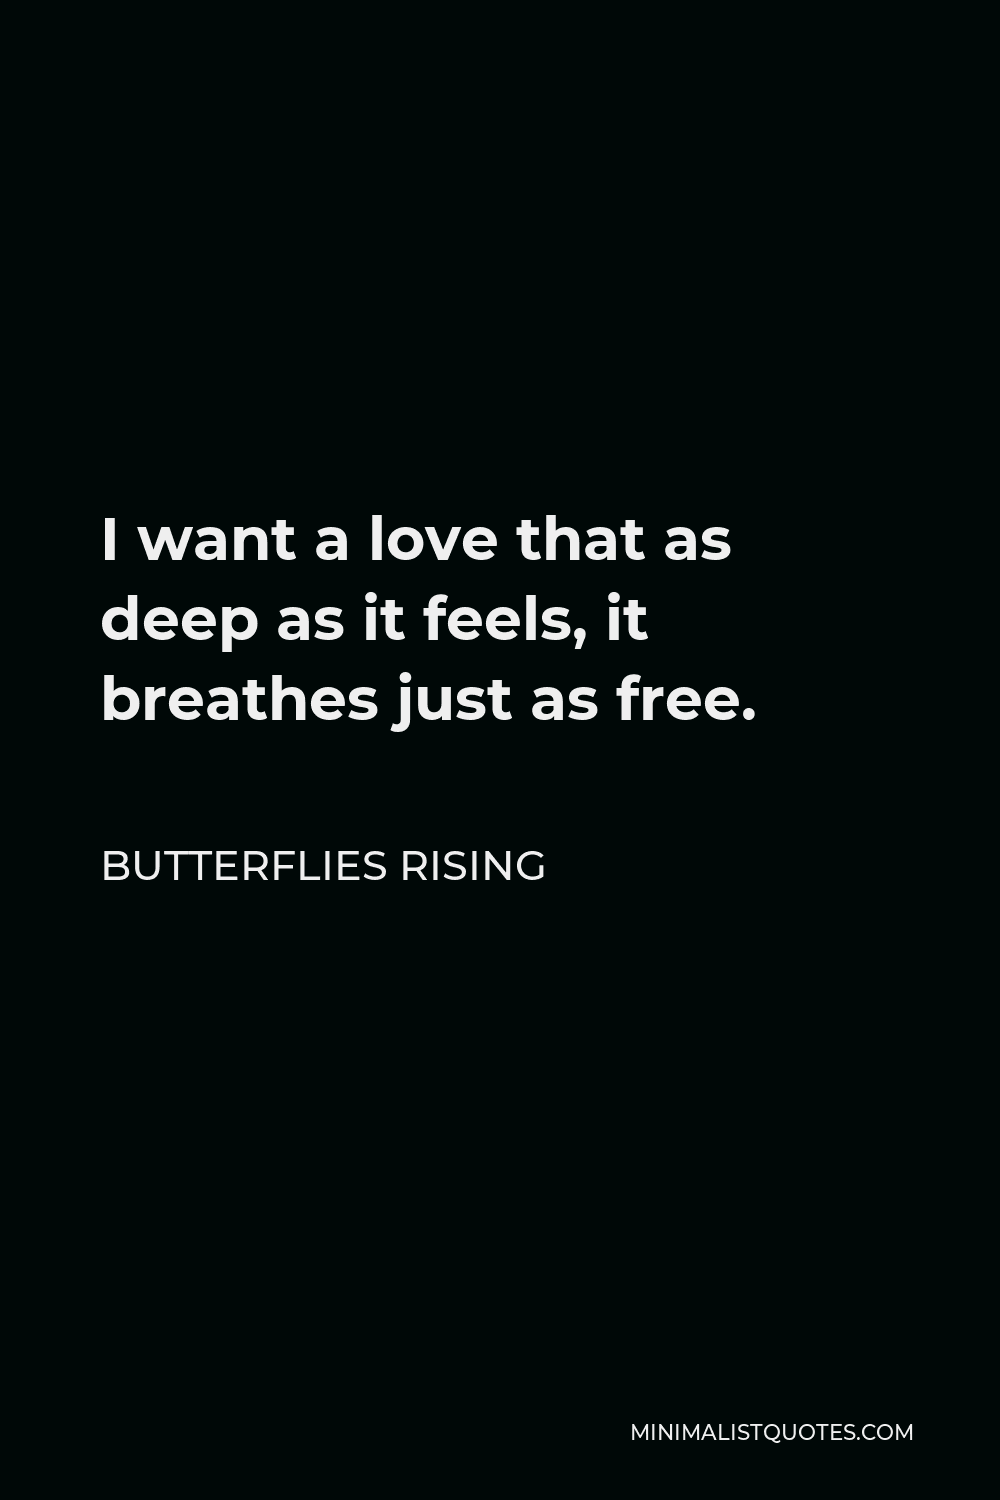 Butterflies Rising Quote - I want a love that as deep as it feels, it breathes just as free.